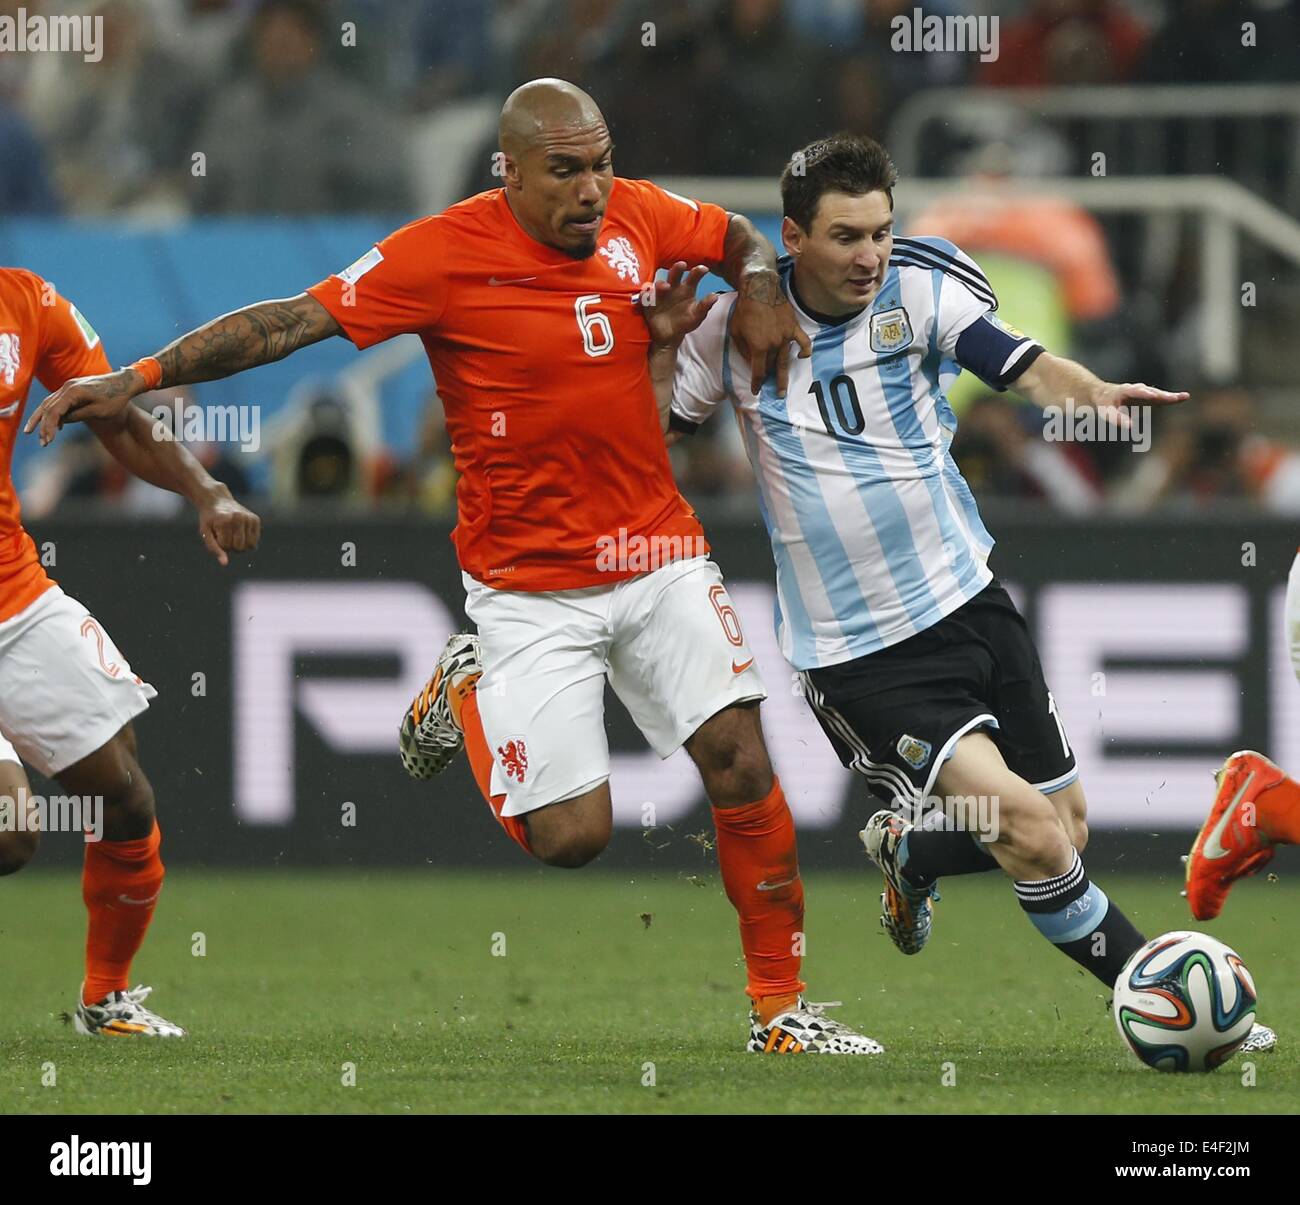 Sao Paulo, Brazil. 9th July, 2014. Netherlands' Nigel de Jong (L) vies with Argentina's Lionel Messi during a semifinal match between Netherlands and Argentina of 2014 FIFA World Cup at the Arena de Sao Paulo Stadium in Sao Paulo, Brazil, on July 9, 2014. Credit:  Wang Lili/Xinhua/Alamy Live News Stock Photo